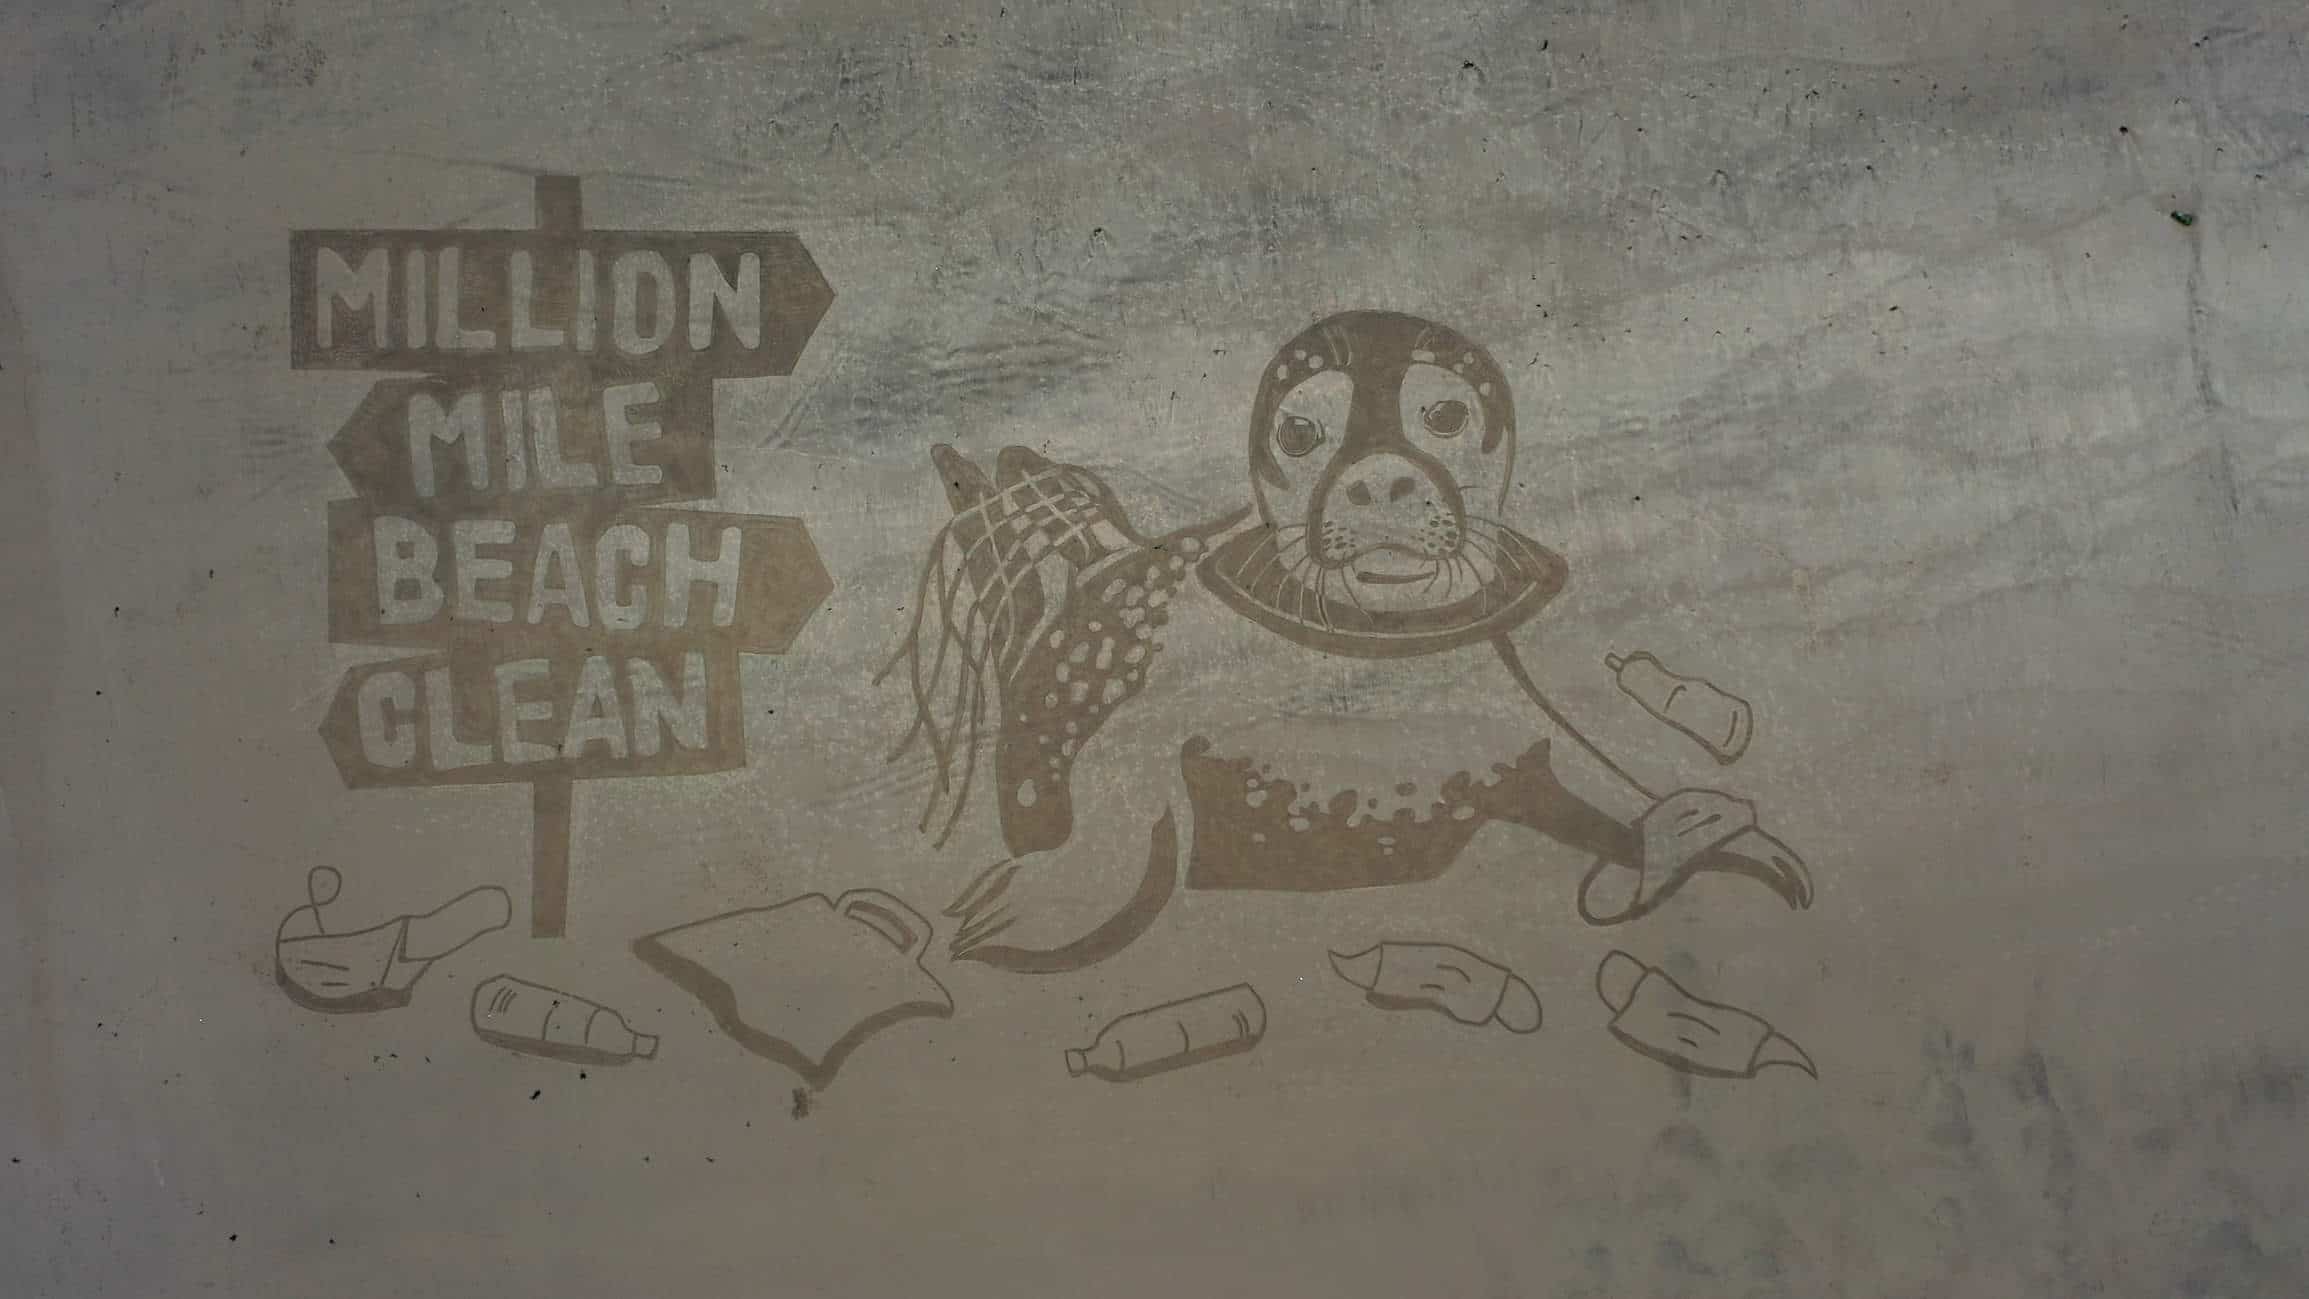 Aerial photo of a seal drawn in the sand and a sign that says "Million mile beach clean"